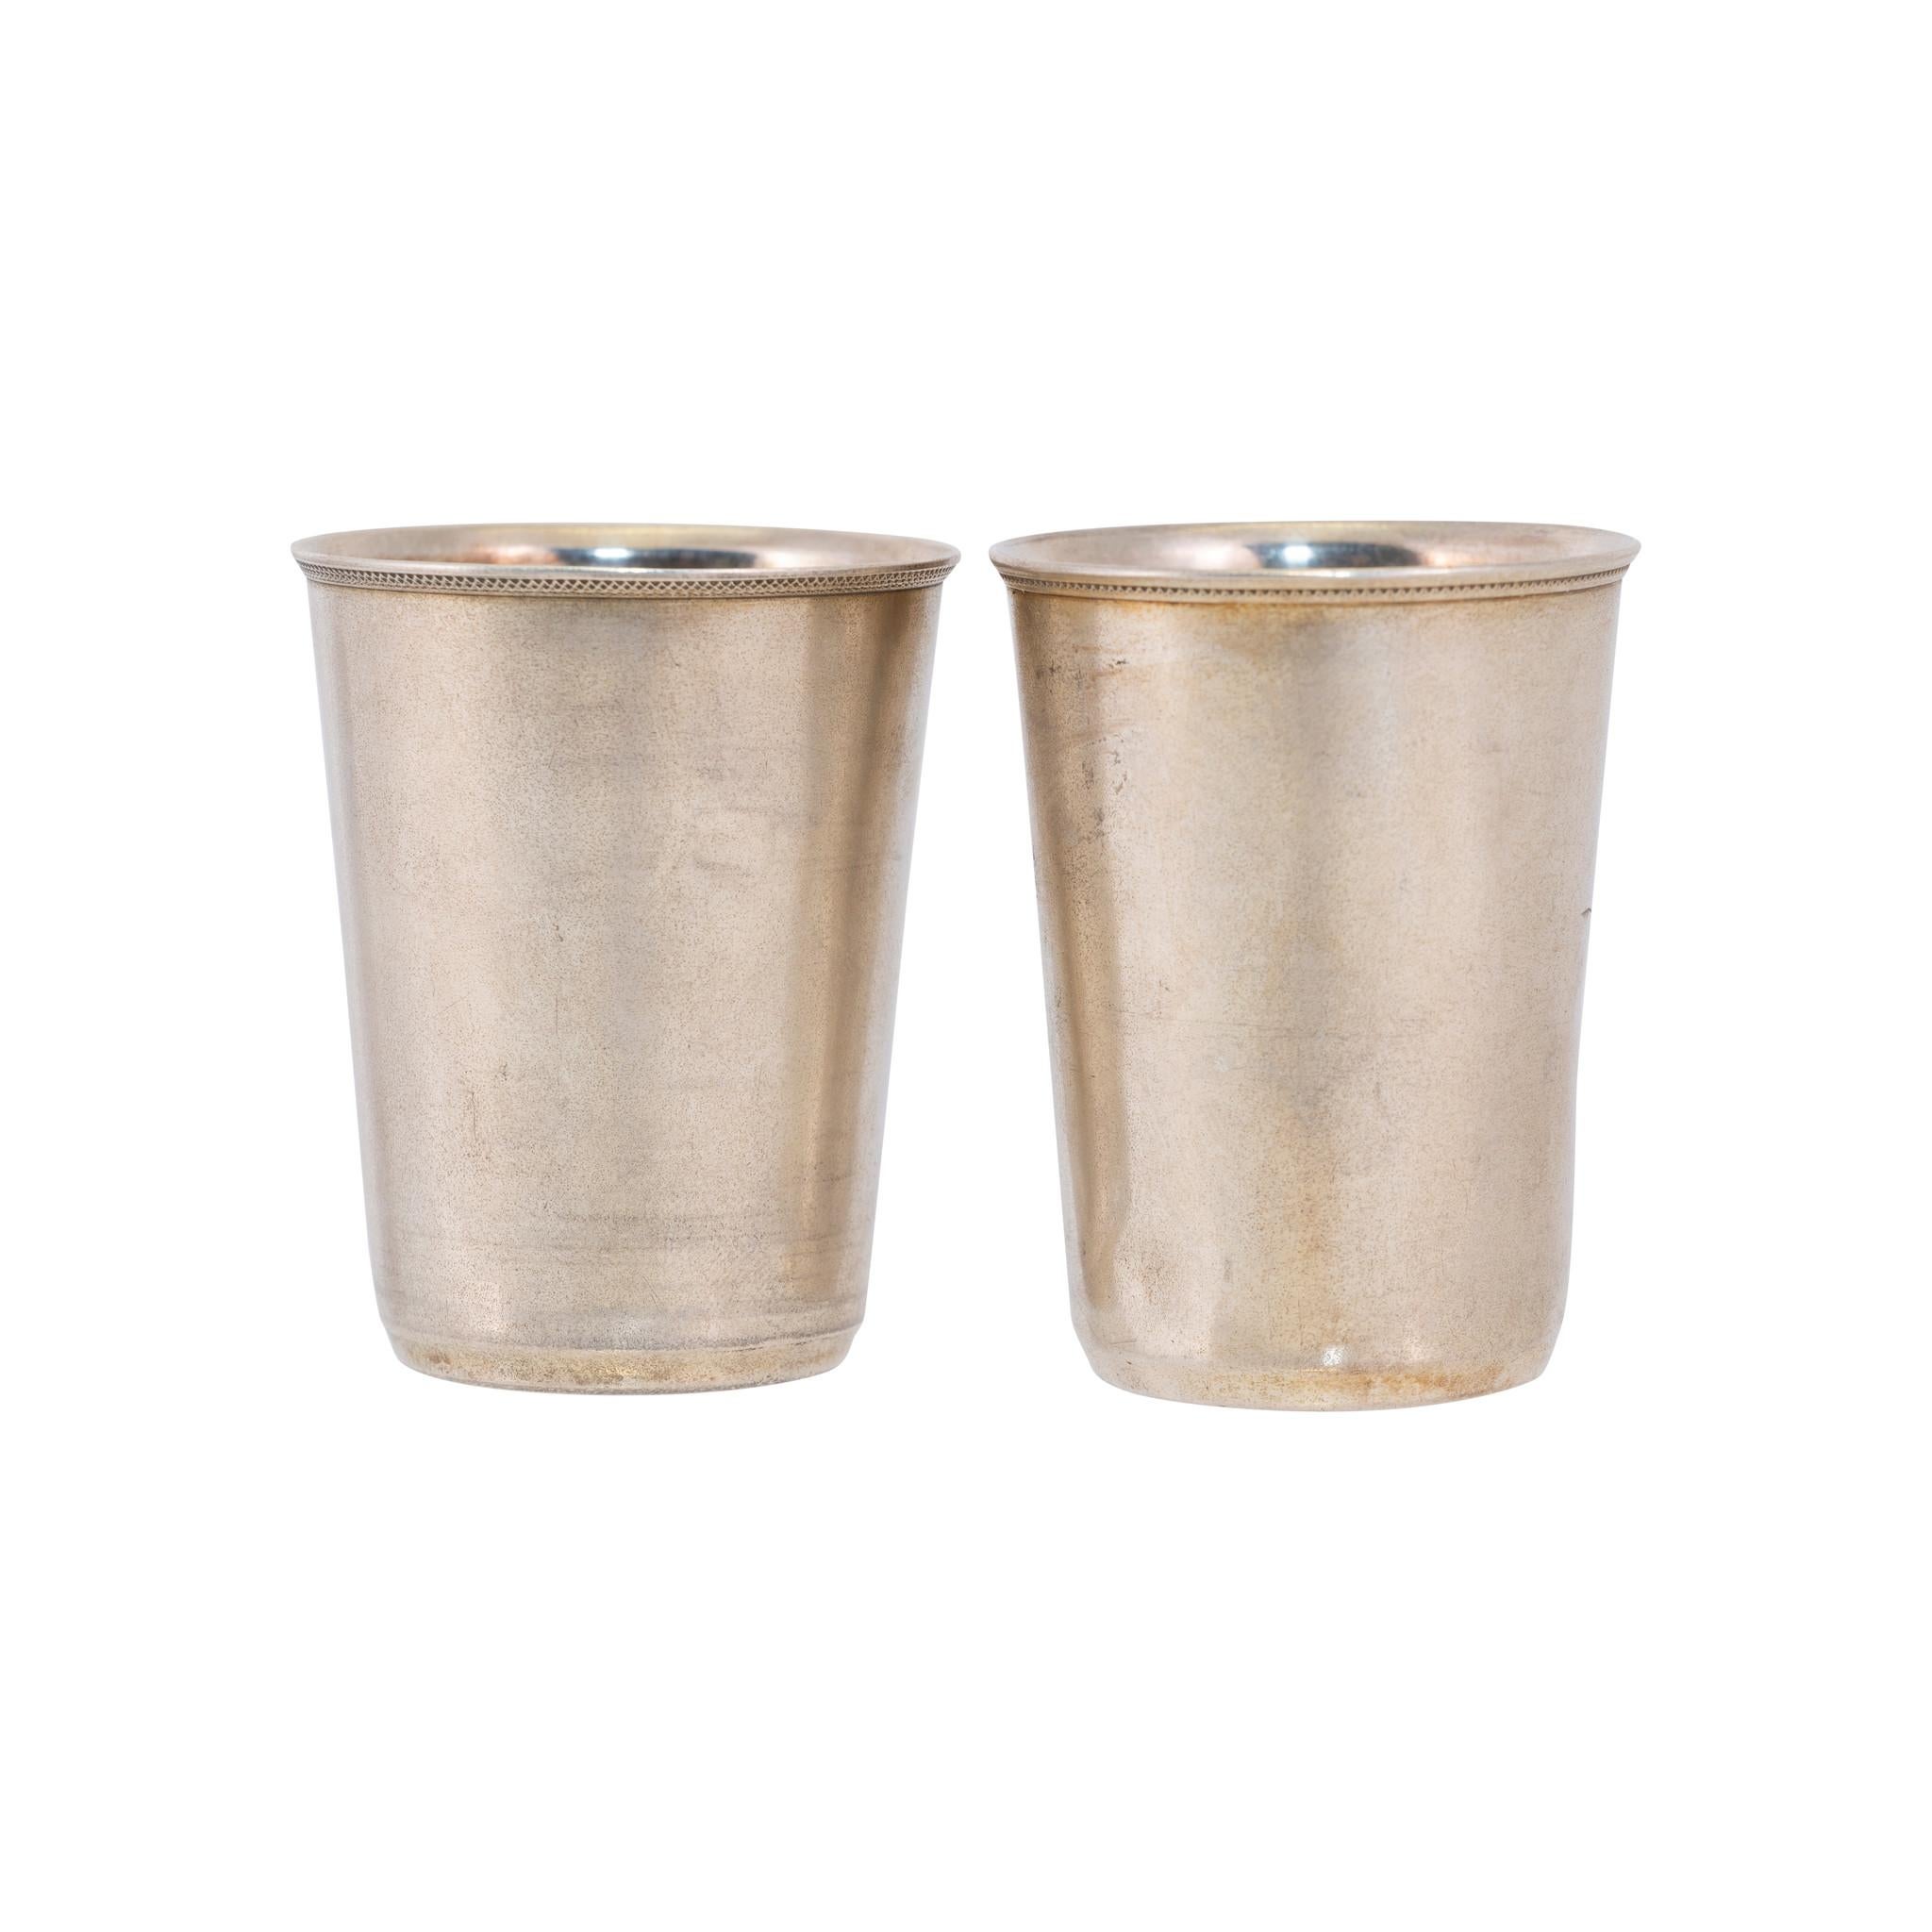 Matched pair Russian engraved sterling shot glasses.

PERIOD: Last quarter 19th Century
ORIGIN: United States
SIZE: 1 1/25